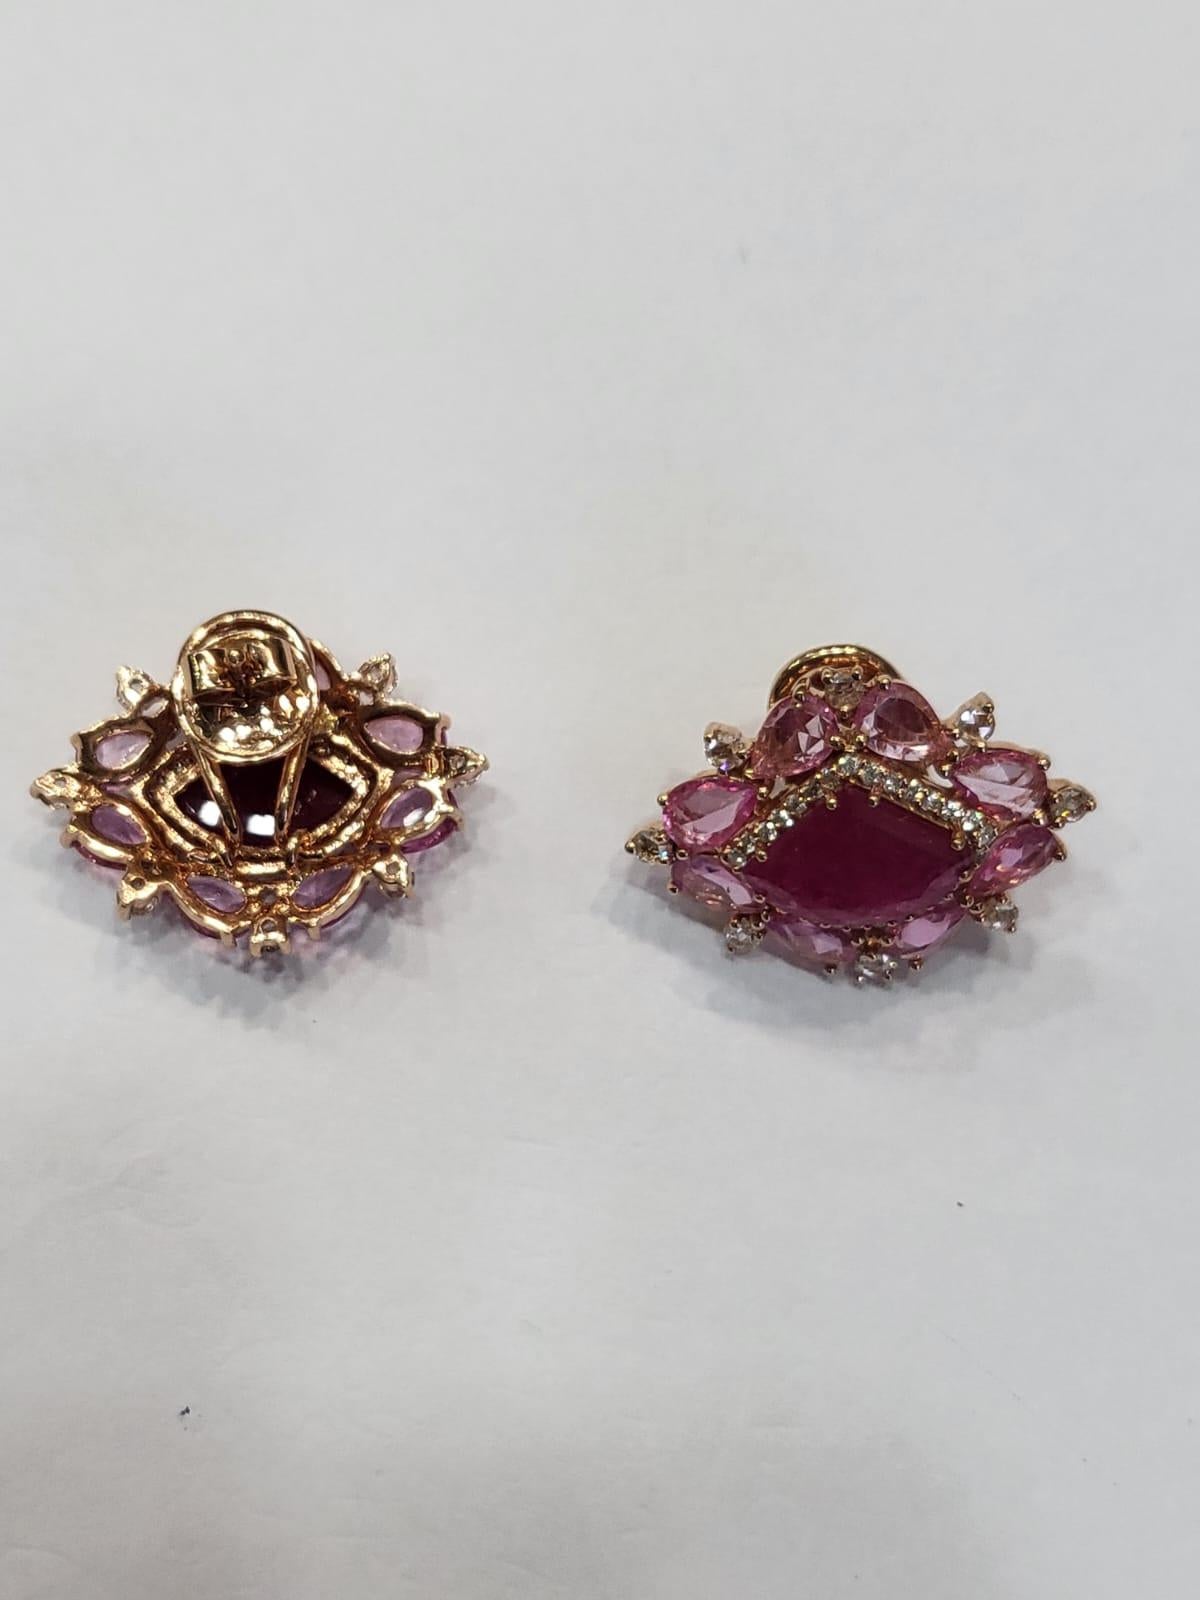 Rose Cut Set in 18K Rose Gold, Mozambique Ruby, Pink Sapphires & Diamonds Stud Earrings